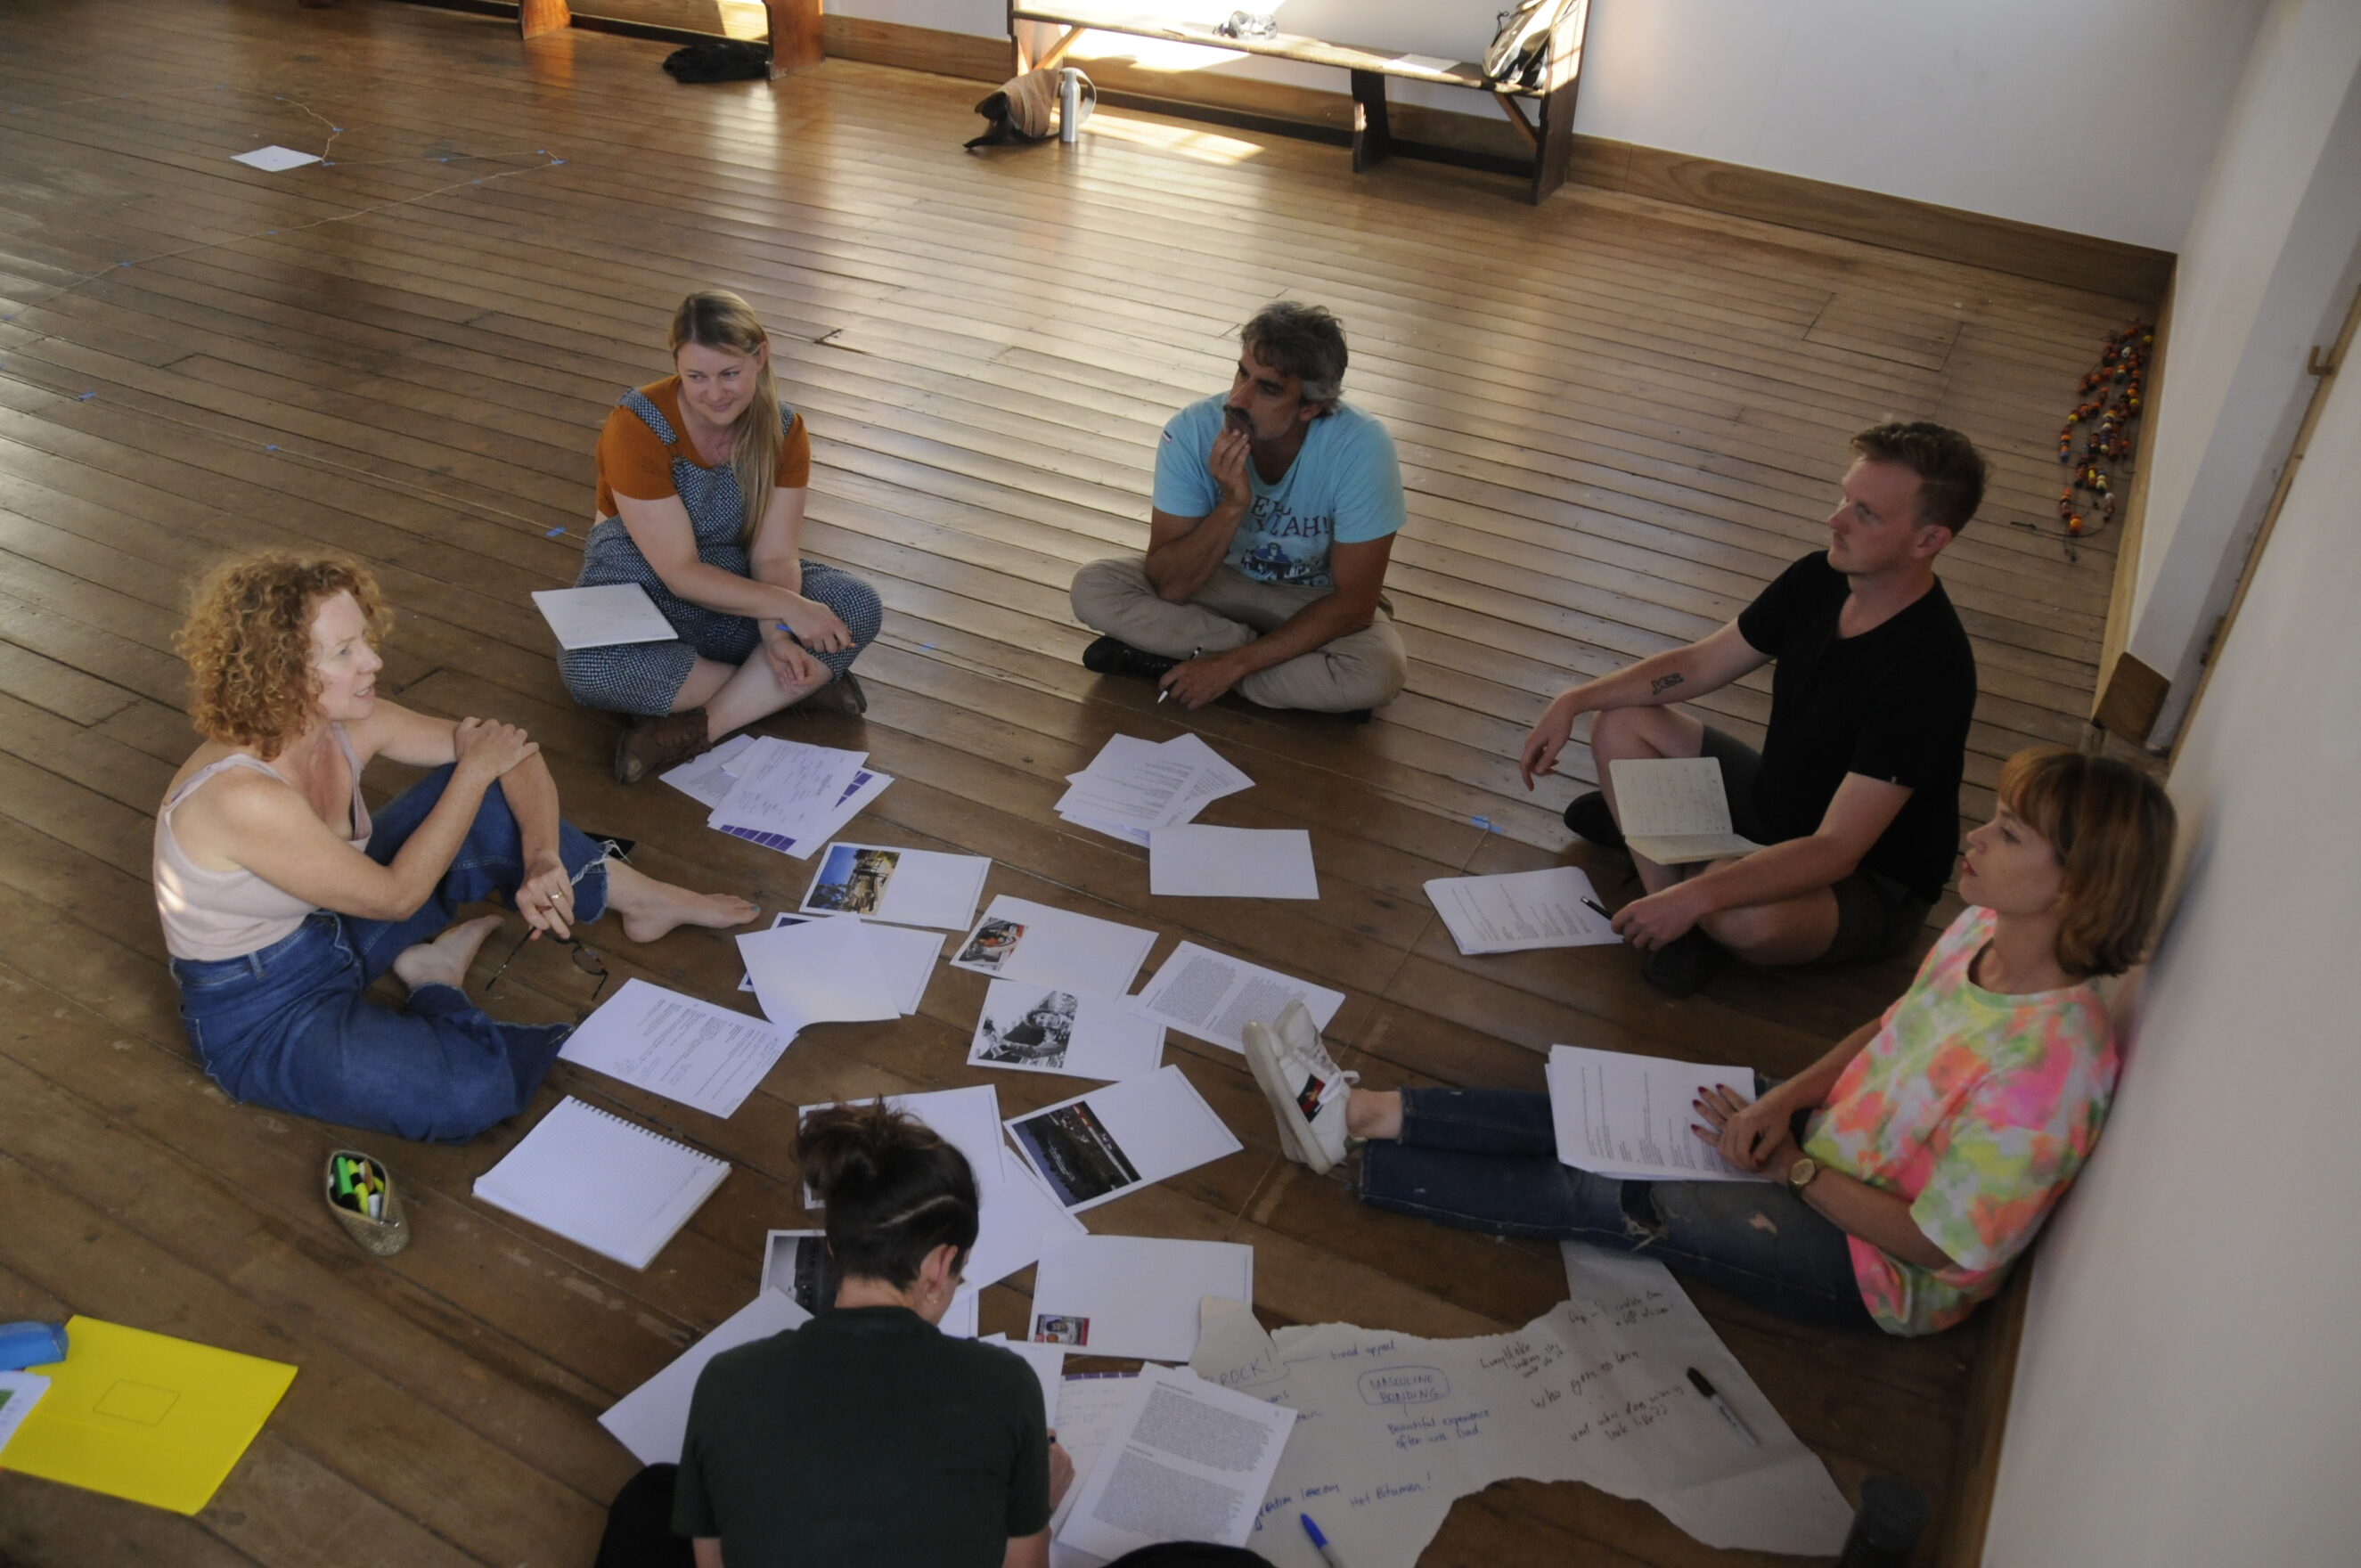 Group of people siting in a circle with papers around them